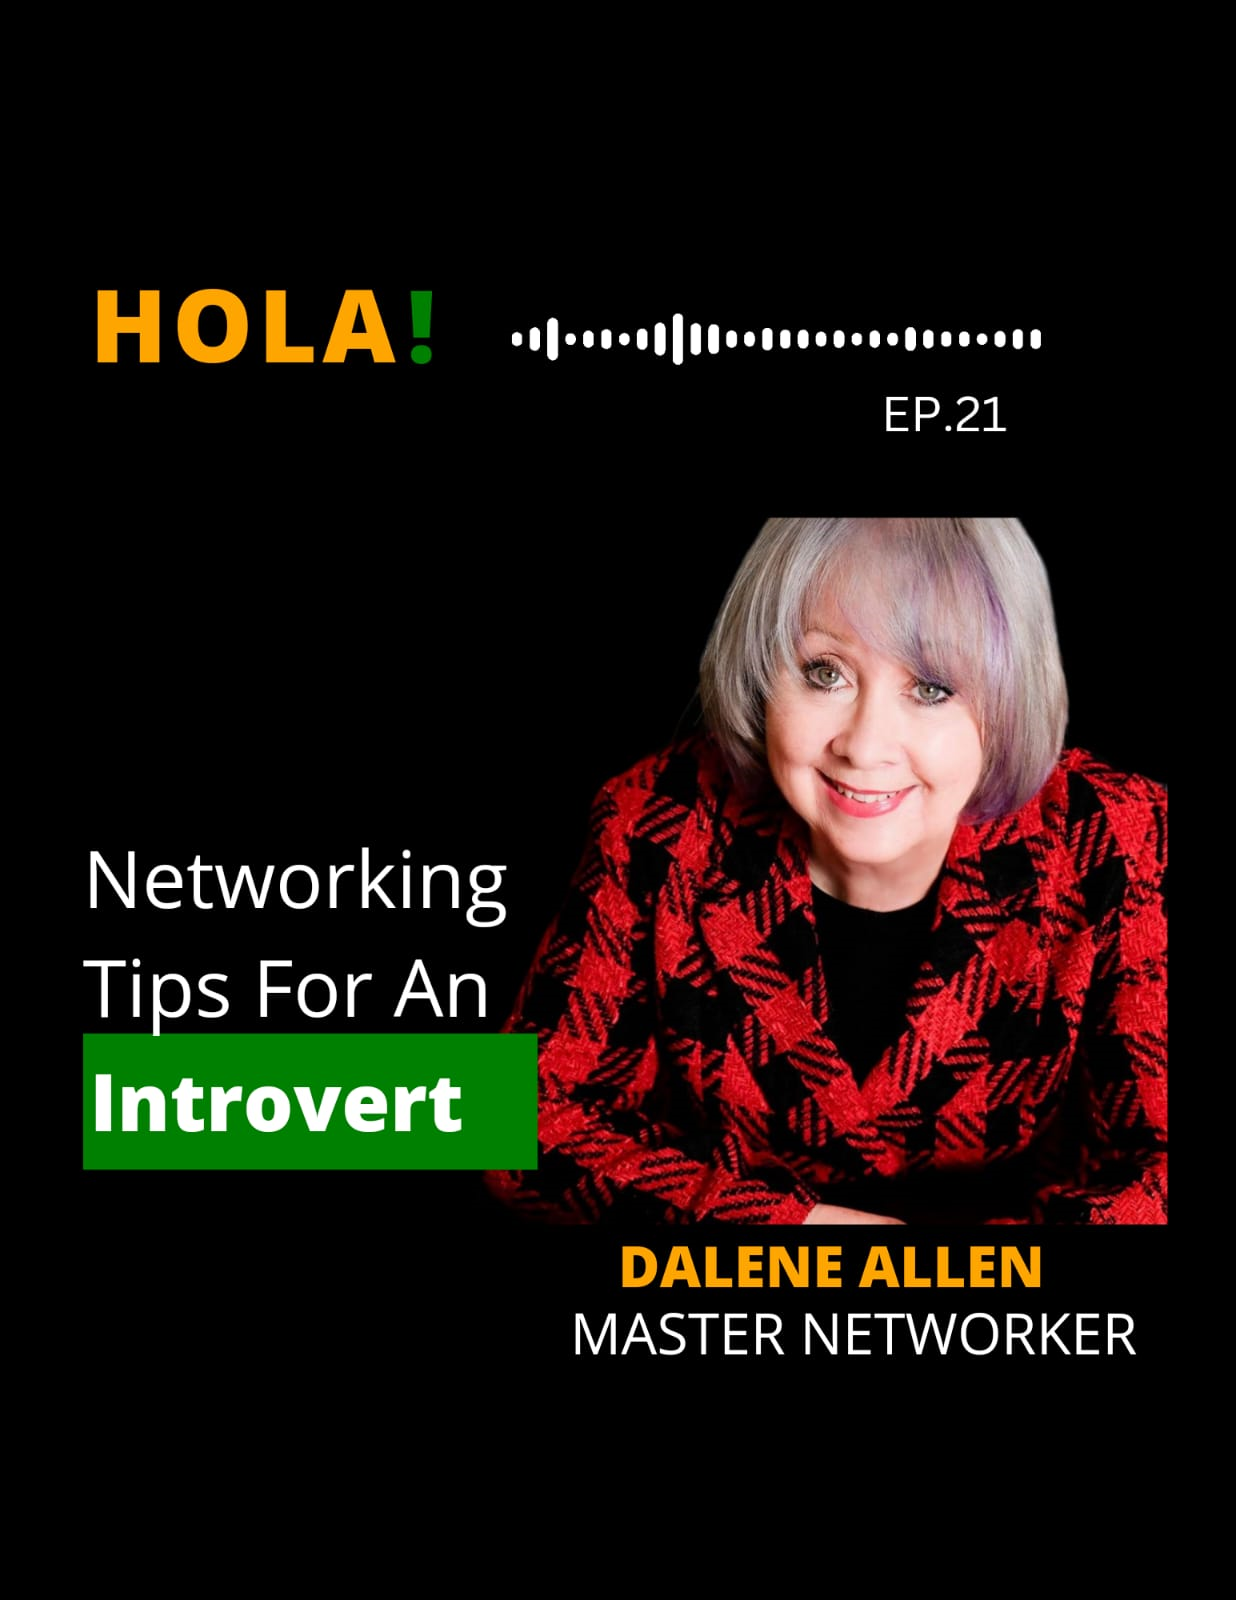 Networking Tips For An Introvert